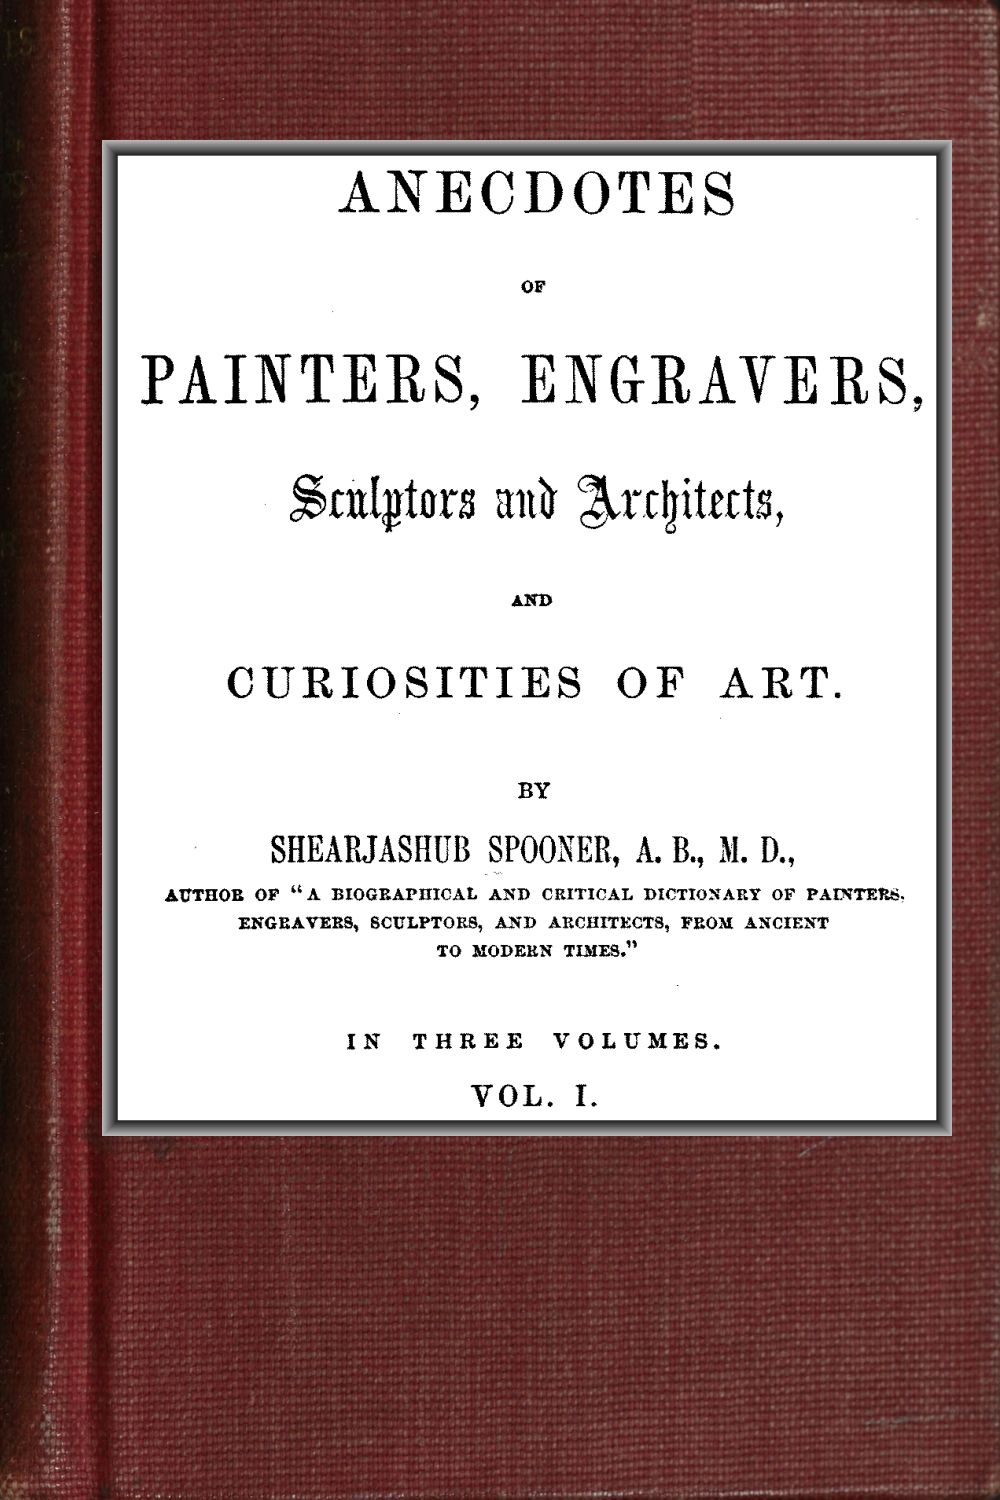 The Project Gutenberg eBook of Anecdotes of Painters, by Shearjashub Spooner. pic